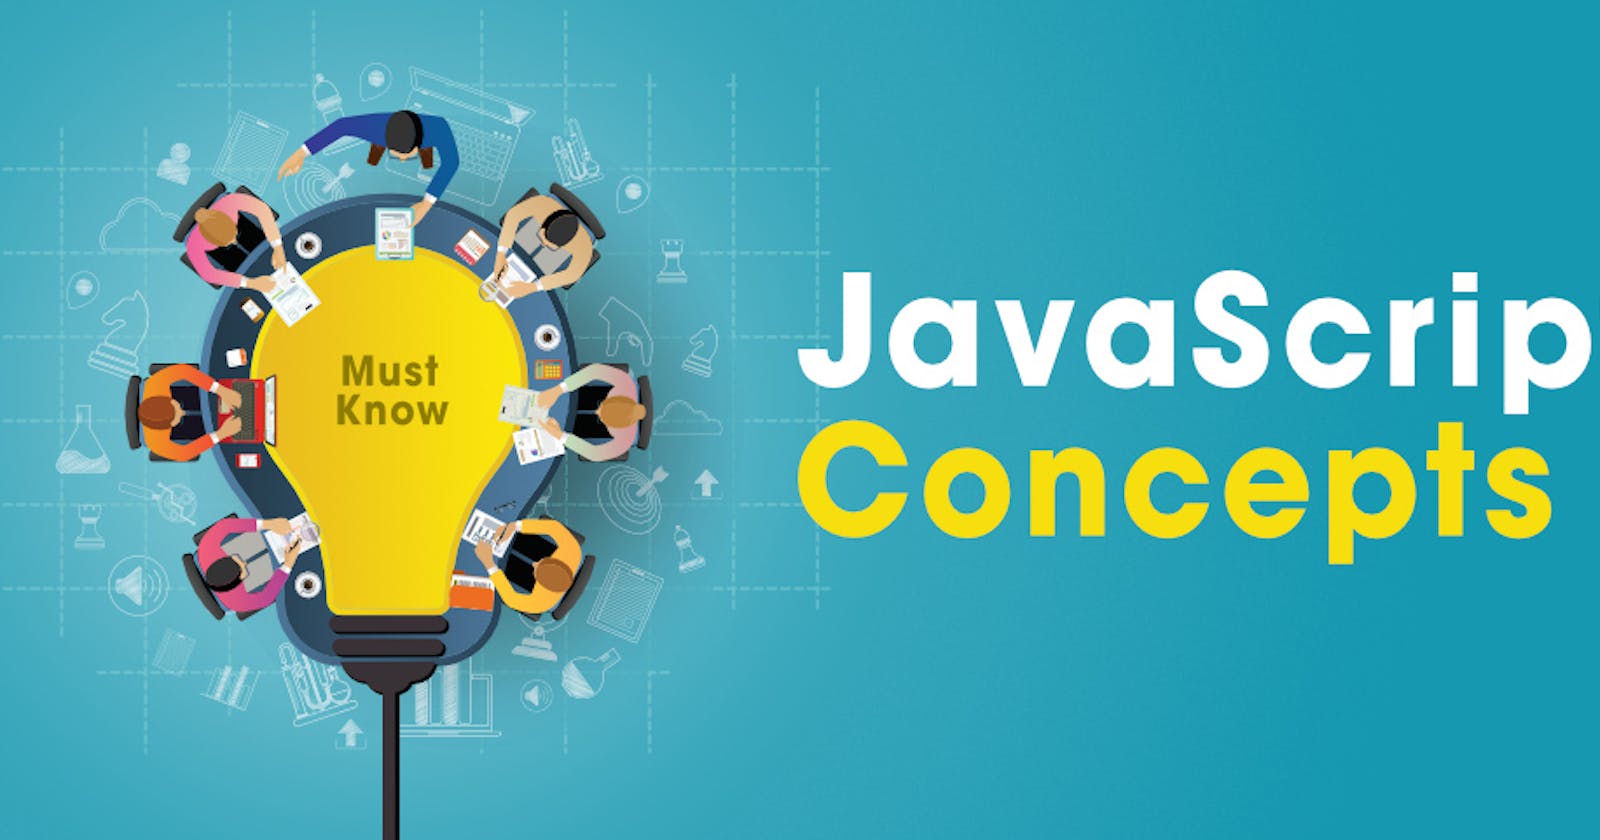 JavaScript Concepts: Object-Oriented Programming, Inheritance, Classes, Error Handling, Asynchronous Programming, Generators, and More